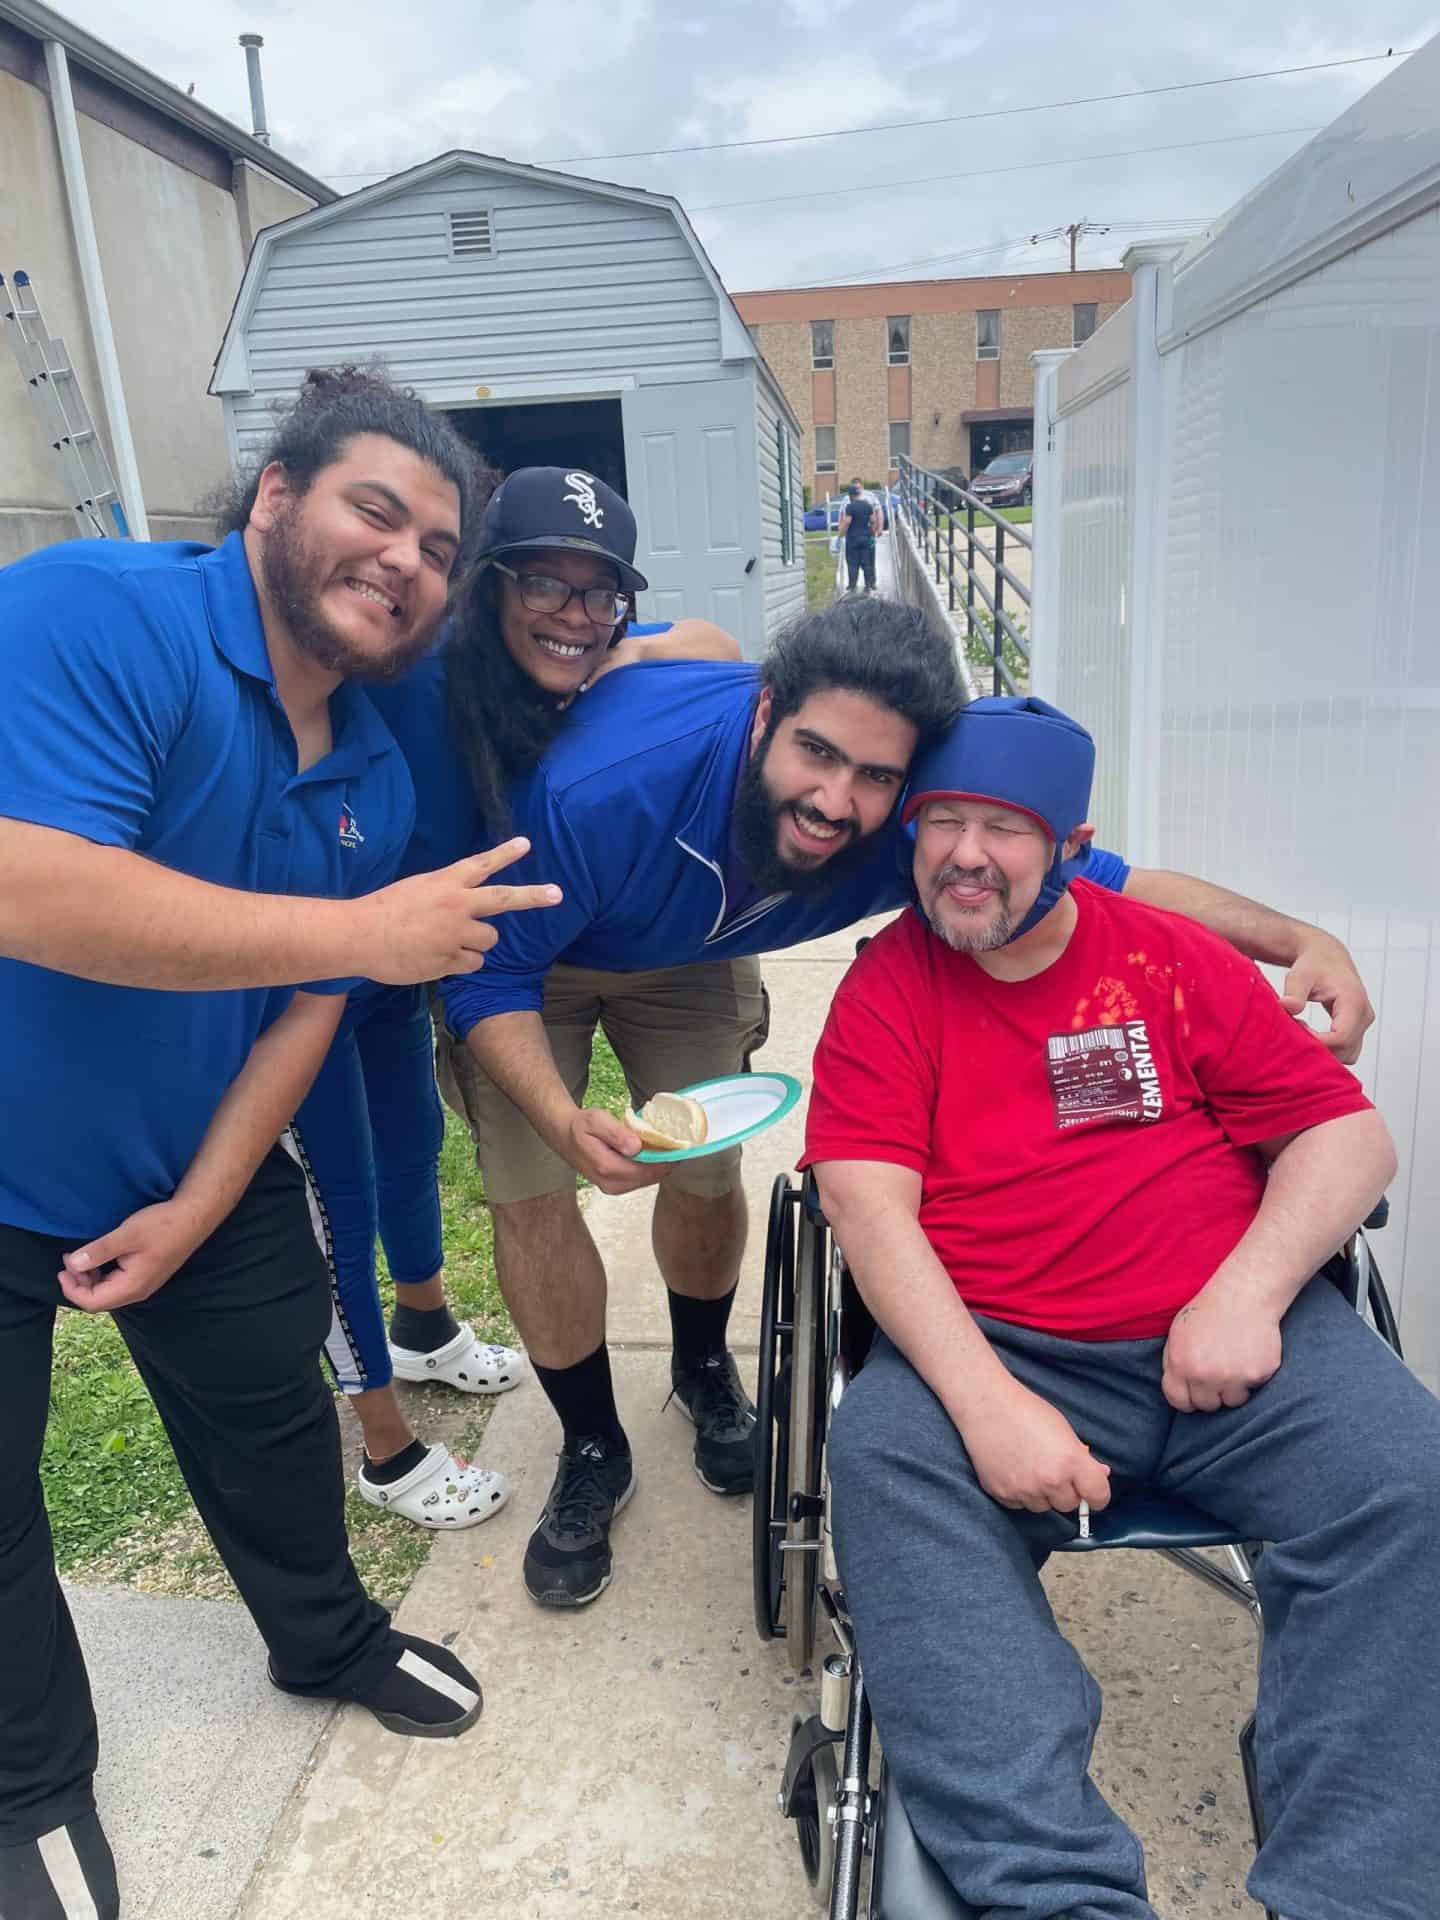 Three NCFL staff members and one resident in a wheelchair smiling and laughing at the Memorial Day Cookout.